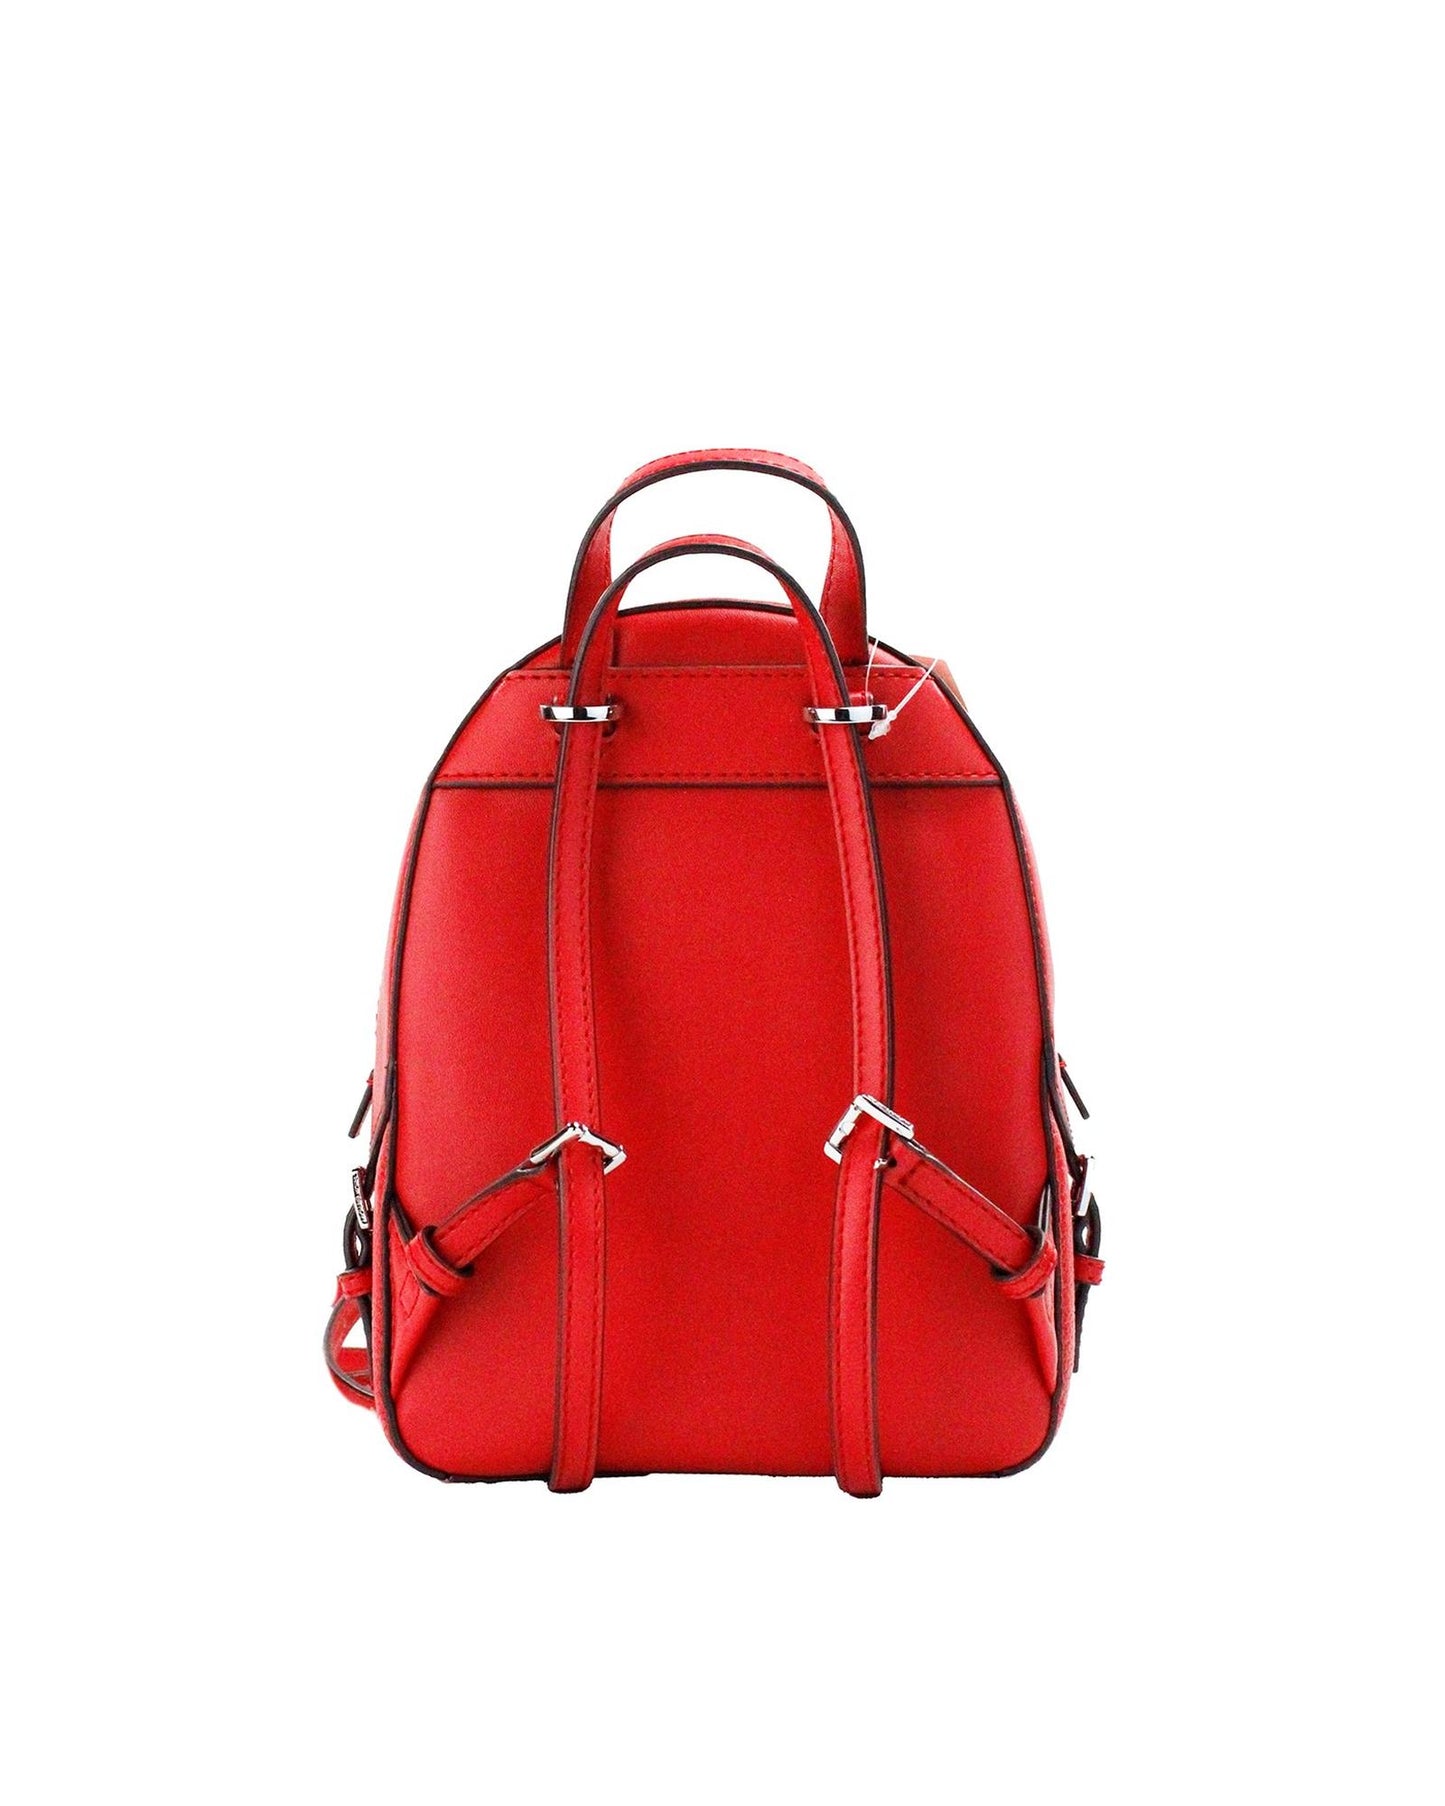 Michael Kors Women's Jaycee Mini XS Bright Red Pebbled Leather Zip Pocket Backpack Bag - One Size